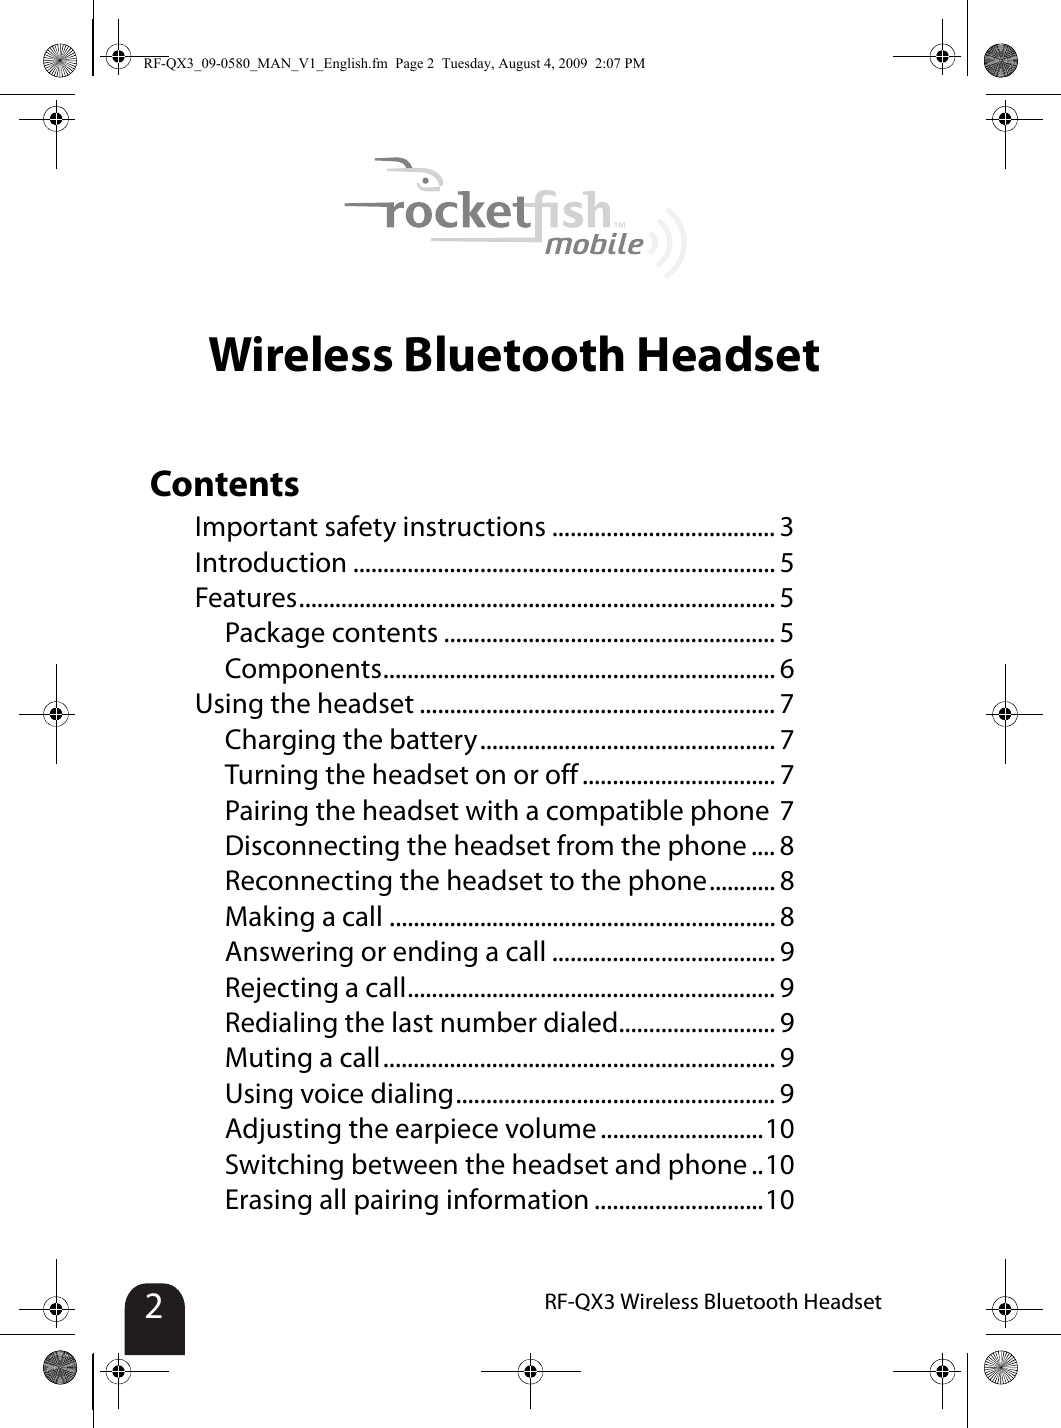 2RF-QX3 Wireless Bluetooth HeadsetWireless Bluetooth HeadsetContentsImportant safety instructions ..................................... 3Introduction ...................................................................... 5Features............................................................................... 5Package contents ....................................................... 5Components................................................................. 6Using the headset ........................................................... 7Charging the battery................................................. 7Turning the headset on or off ................................ 7Pairing the headset with a compatible phone 7Disconnecting the headset from the phone .... 8Reconnecting the headset to the phone........... 8Making a call ................................................................ 8Answering or ending a call ..................................... 9Rejecting a call............................................................. 9Redialing the last number dialed.......................... 9Muting a call................................................................. 9Using voice dialing..................................................... 9Adjusting the earpiece volume ...........................10Switching between the headset and phone ..10Erasing all pairing information ............................10RF-QX3_09-0580_MAN_V1_English.fm  Page 2  Tuesday, August 4, 2009  2:07 PM